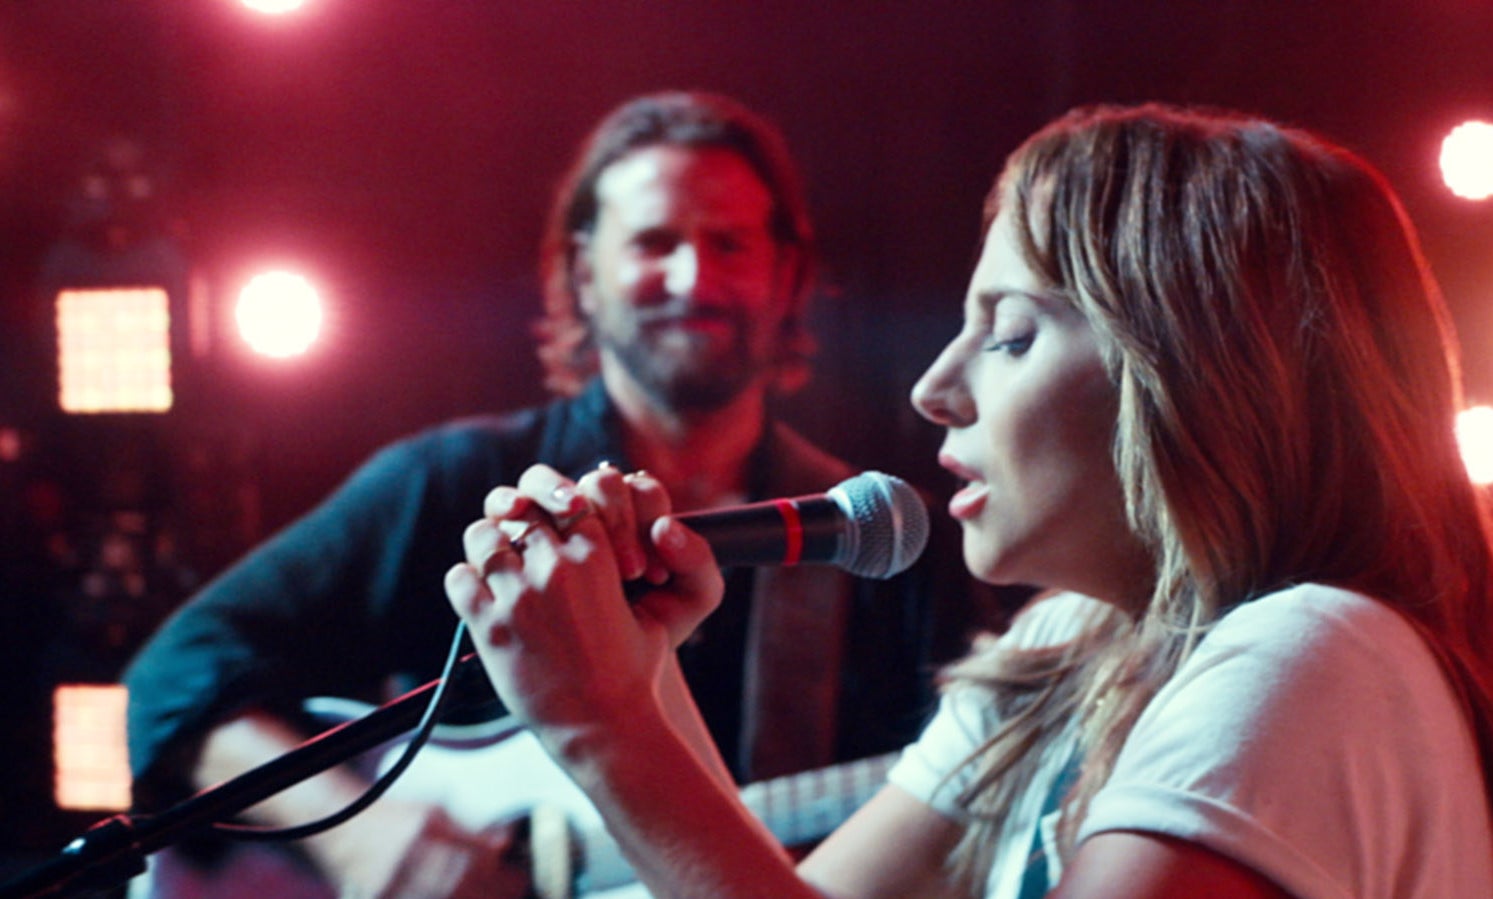 Gaga singing in a scene from the film as Bradley&#x27;s character plays the guitar and watches her